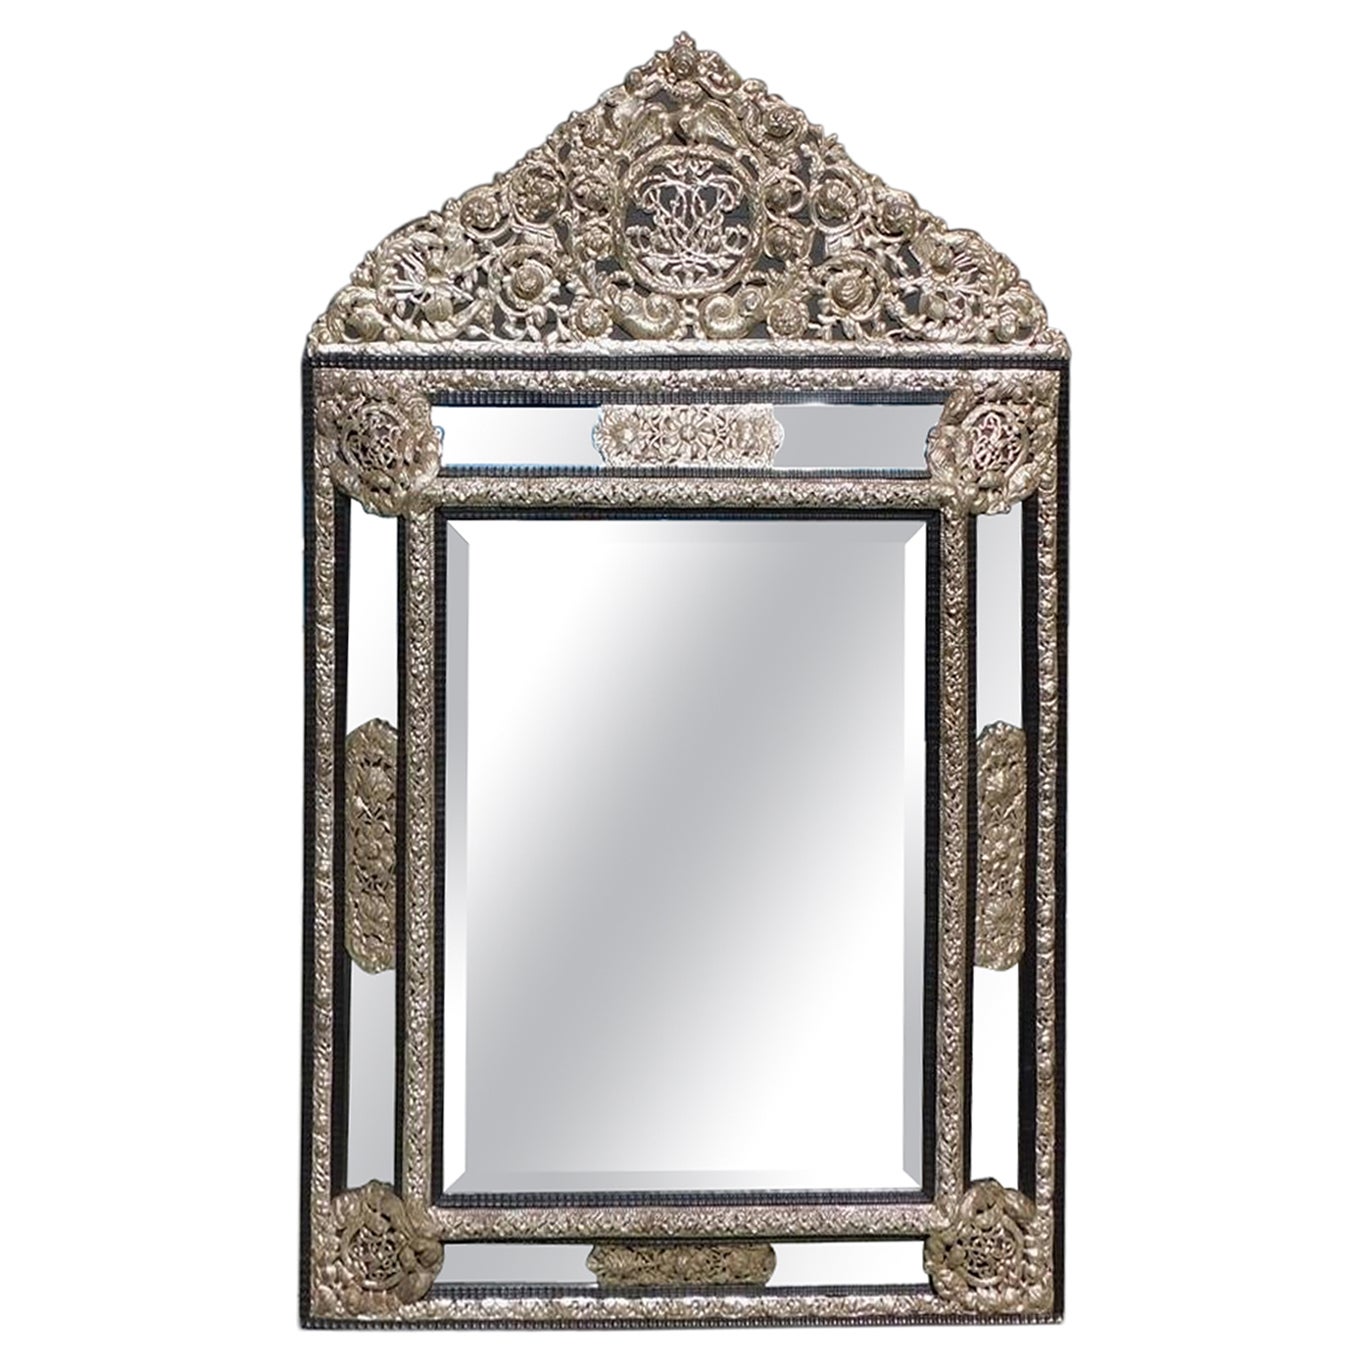 Italian Silver Gilt Embossed Foilate Wall Mirror with Ebonized Frame, Circa 1780 For Sale